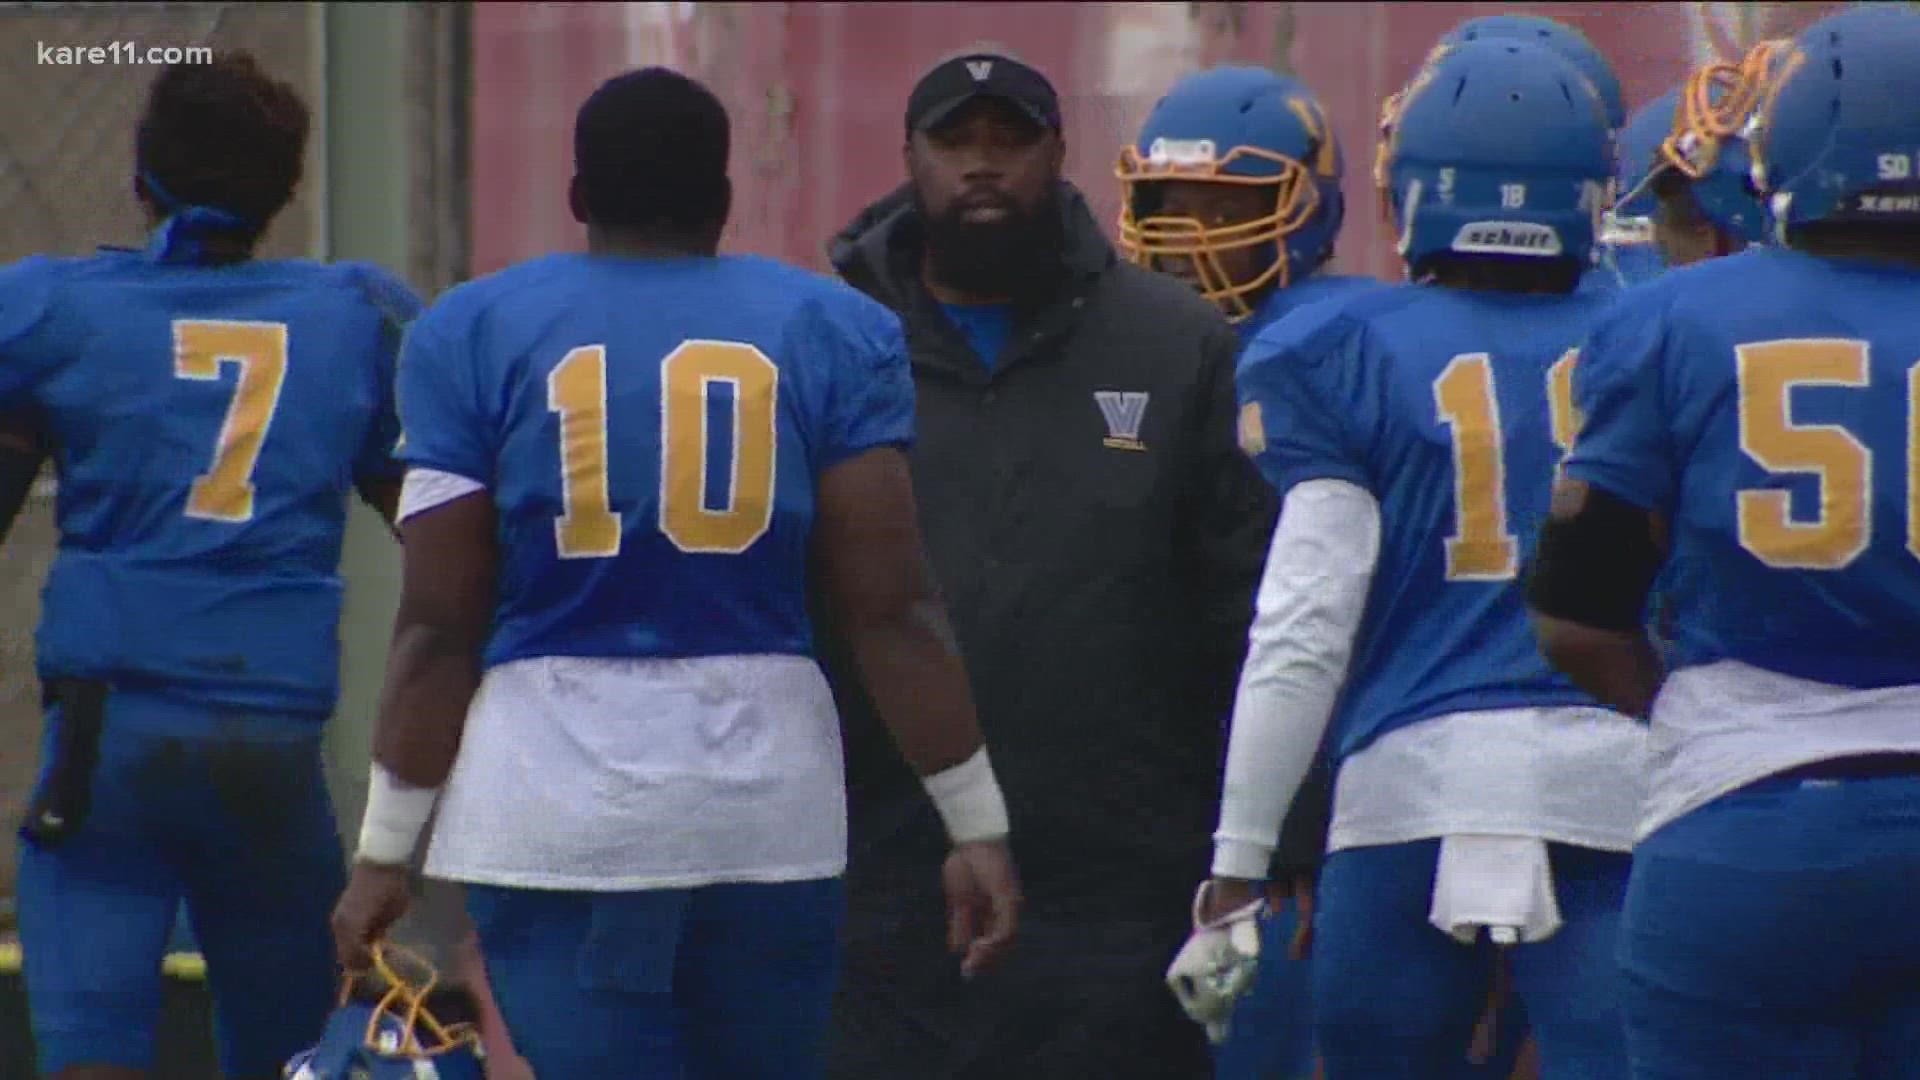 Terrence Isaac played for Ely's Vermilion Community College. Now, he's back as coach with goals for his players and community beyond football.